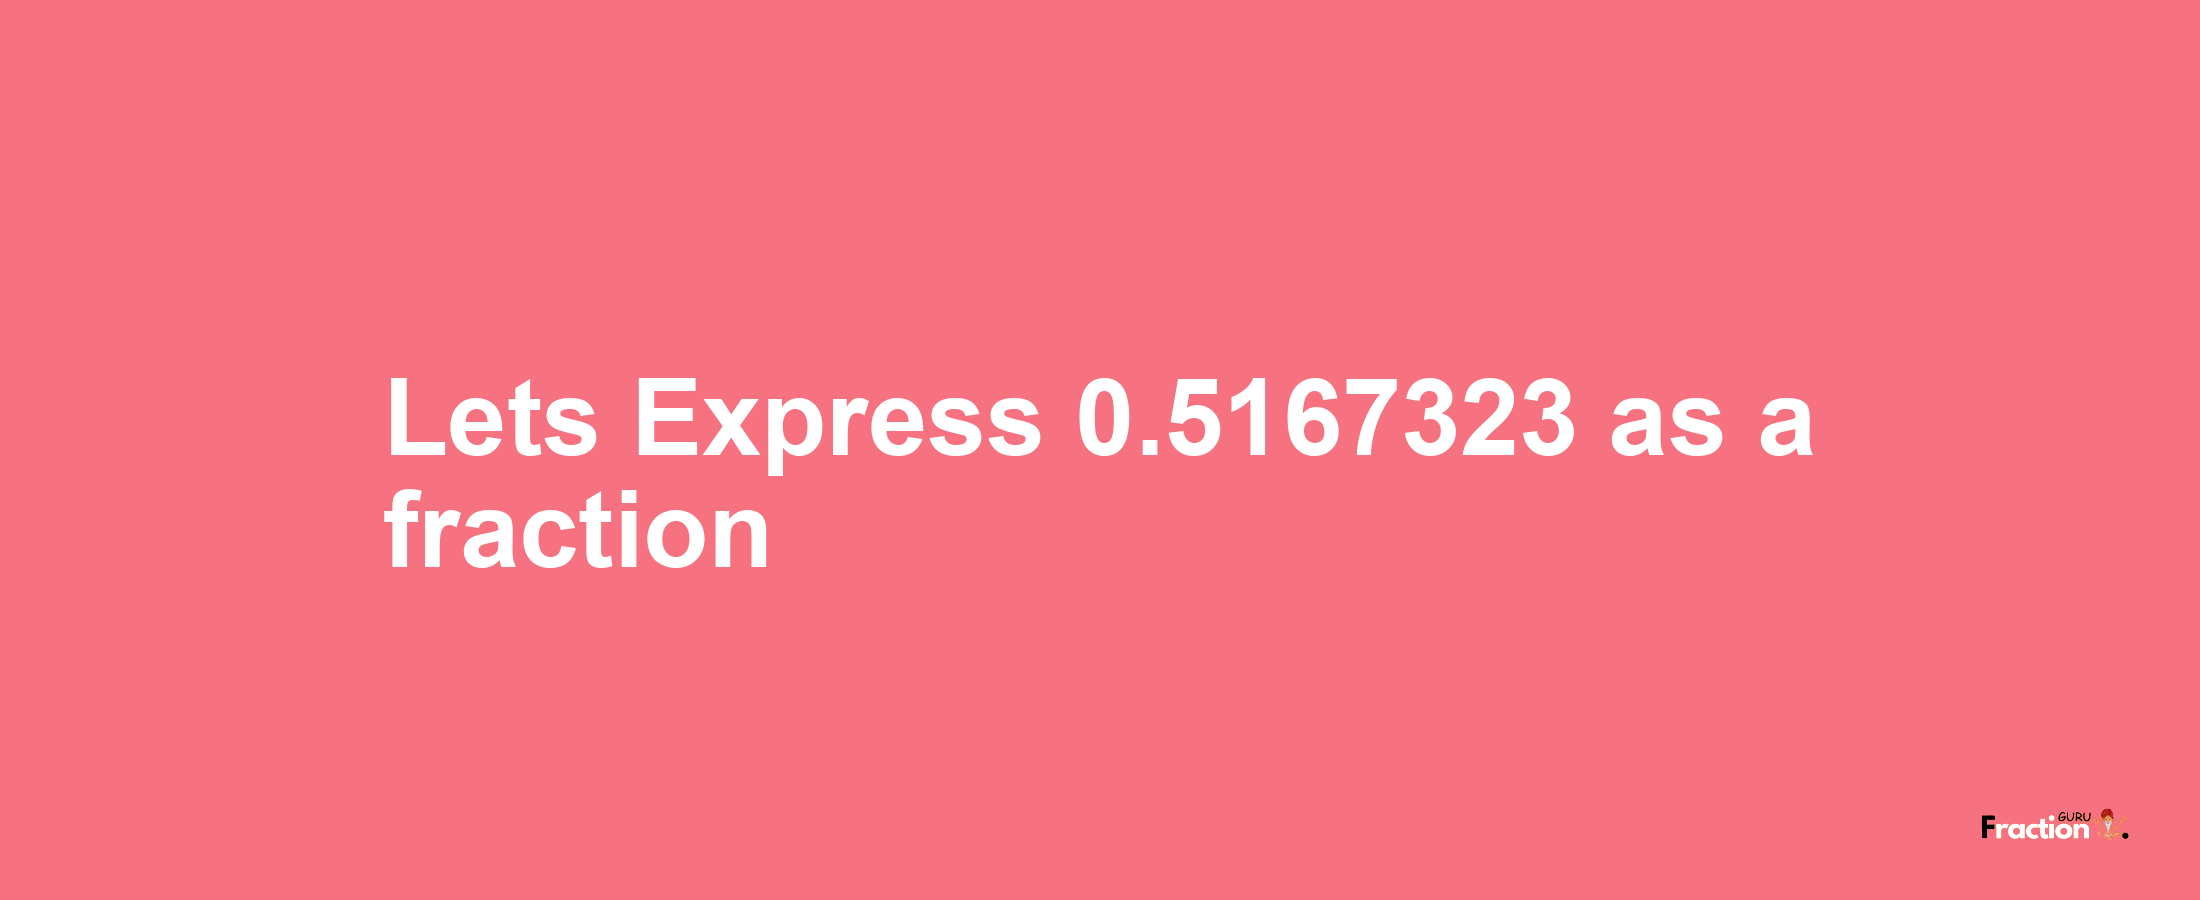 Lets Express 0.5167323 as afraction